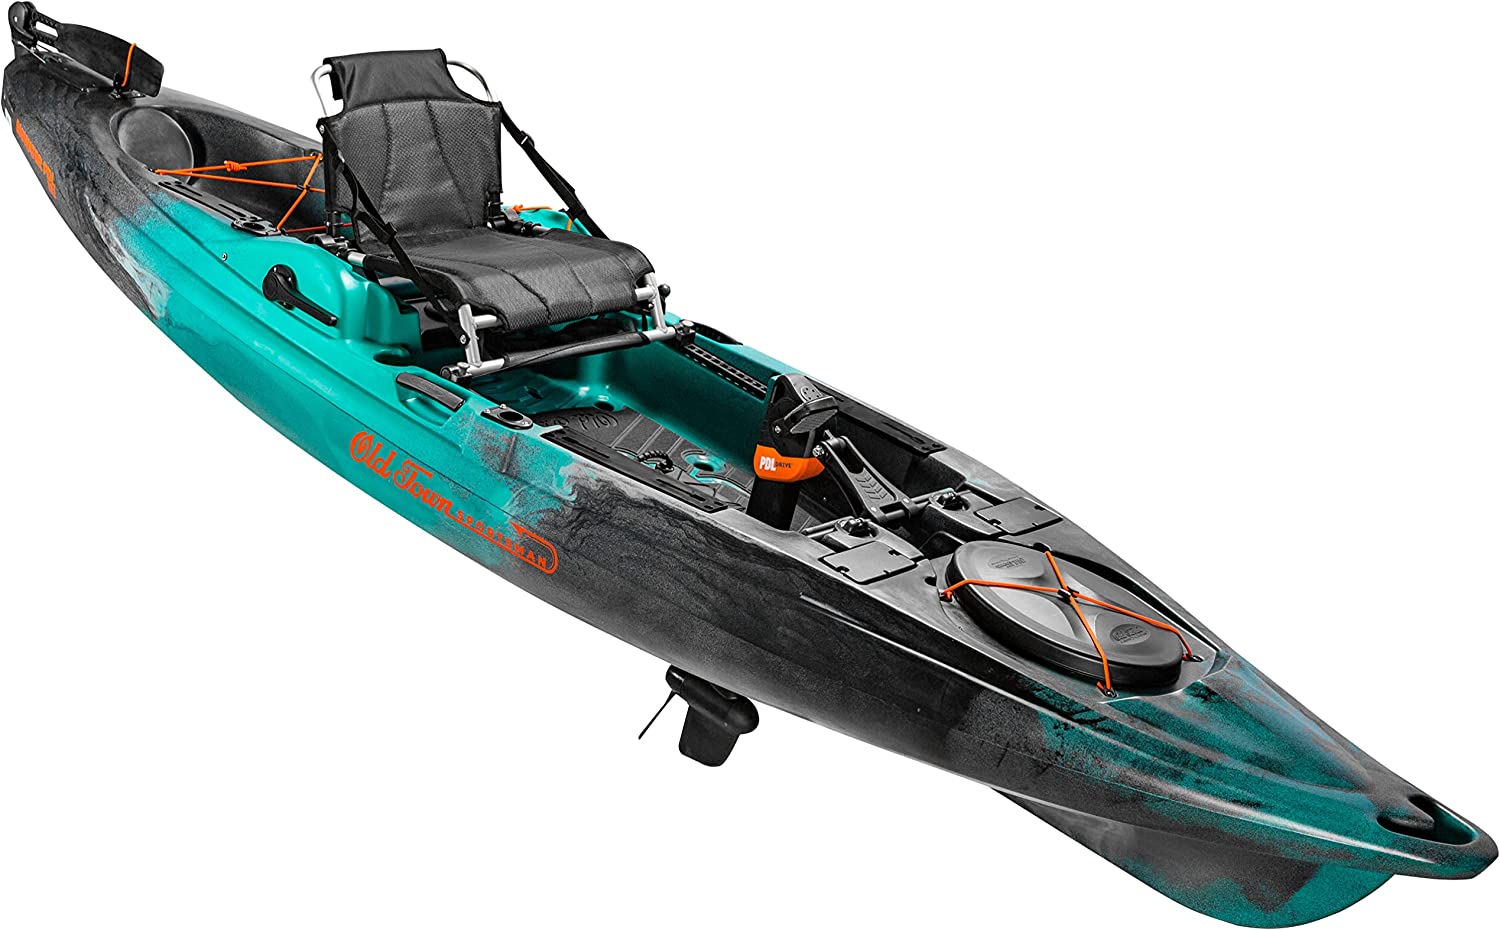 Photograph of a green kayak with a seat and foot pedal system.